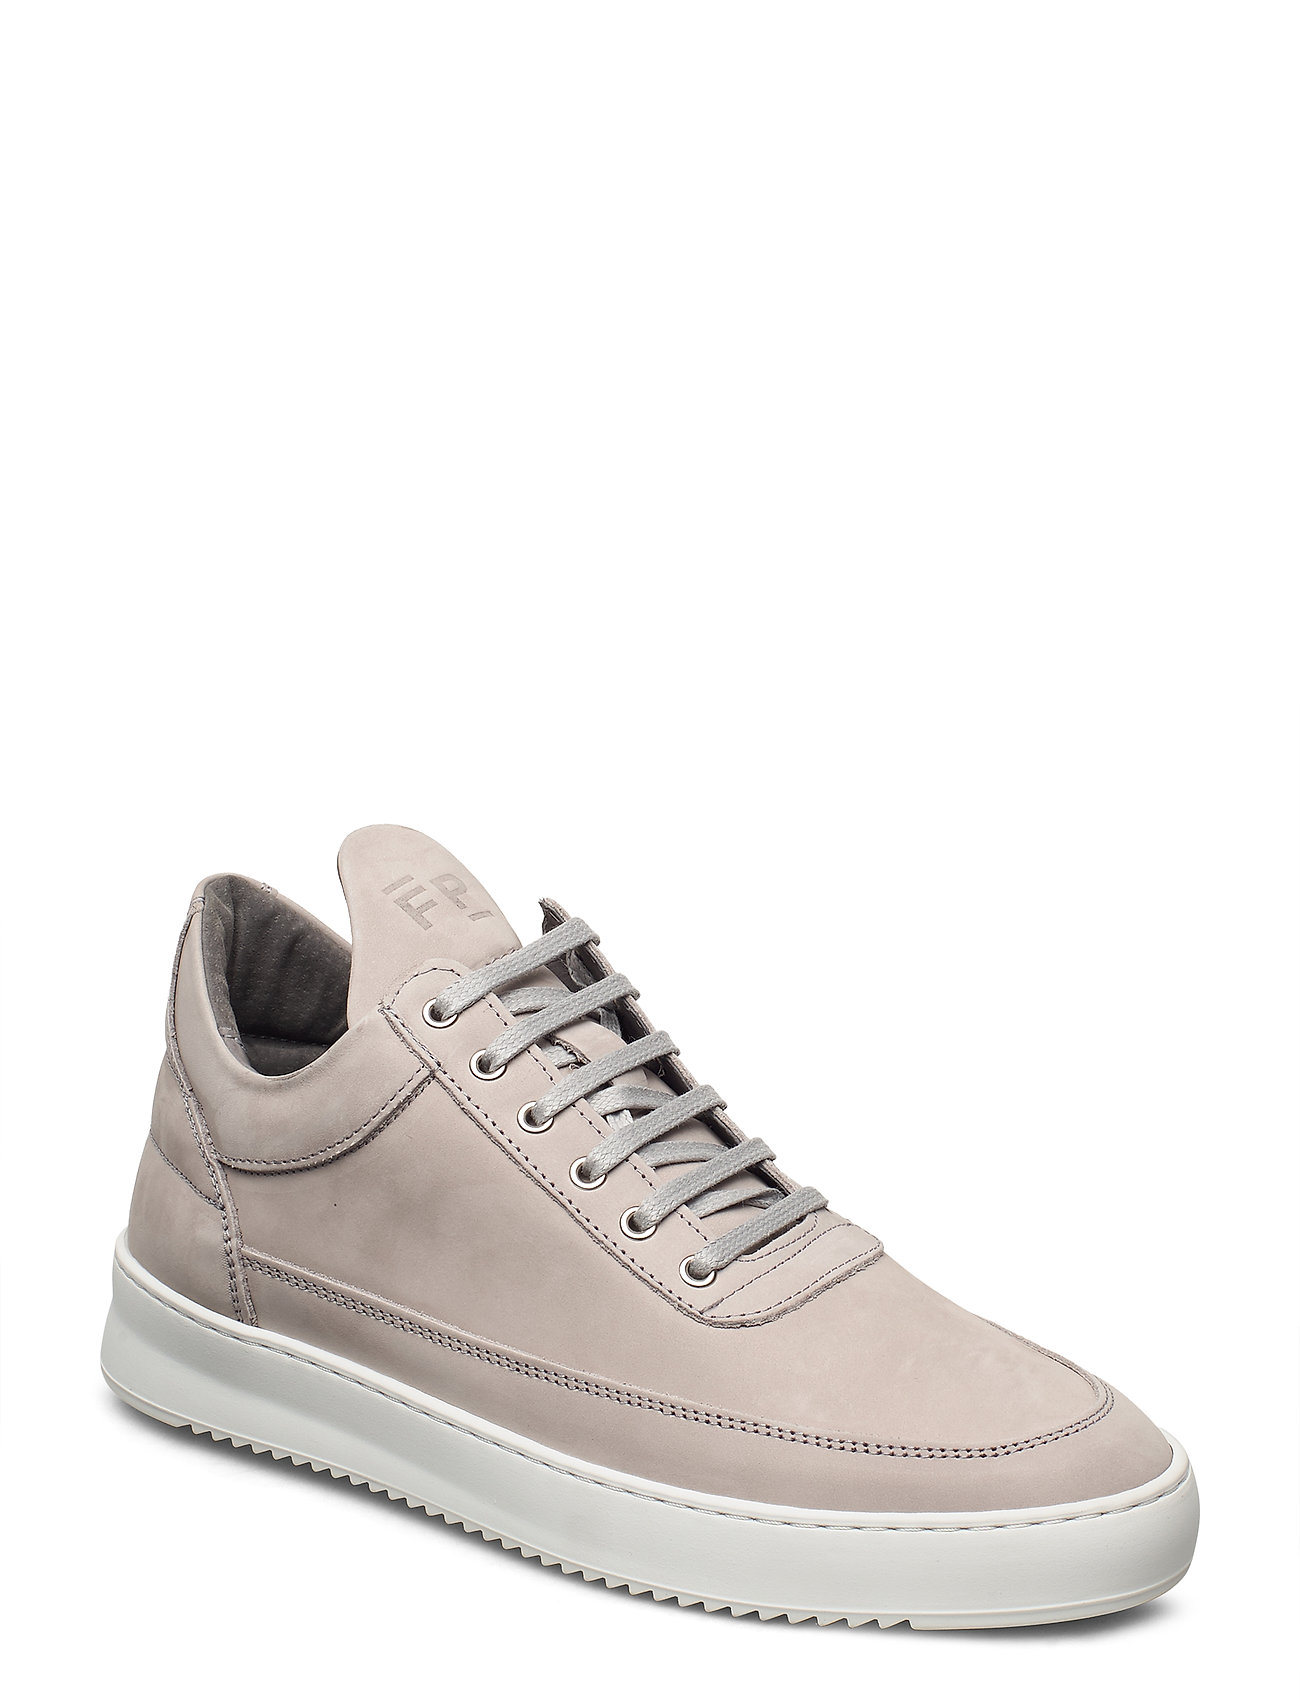 Buy > low top ripple filling pieces > in stock